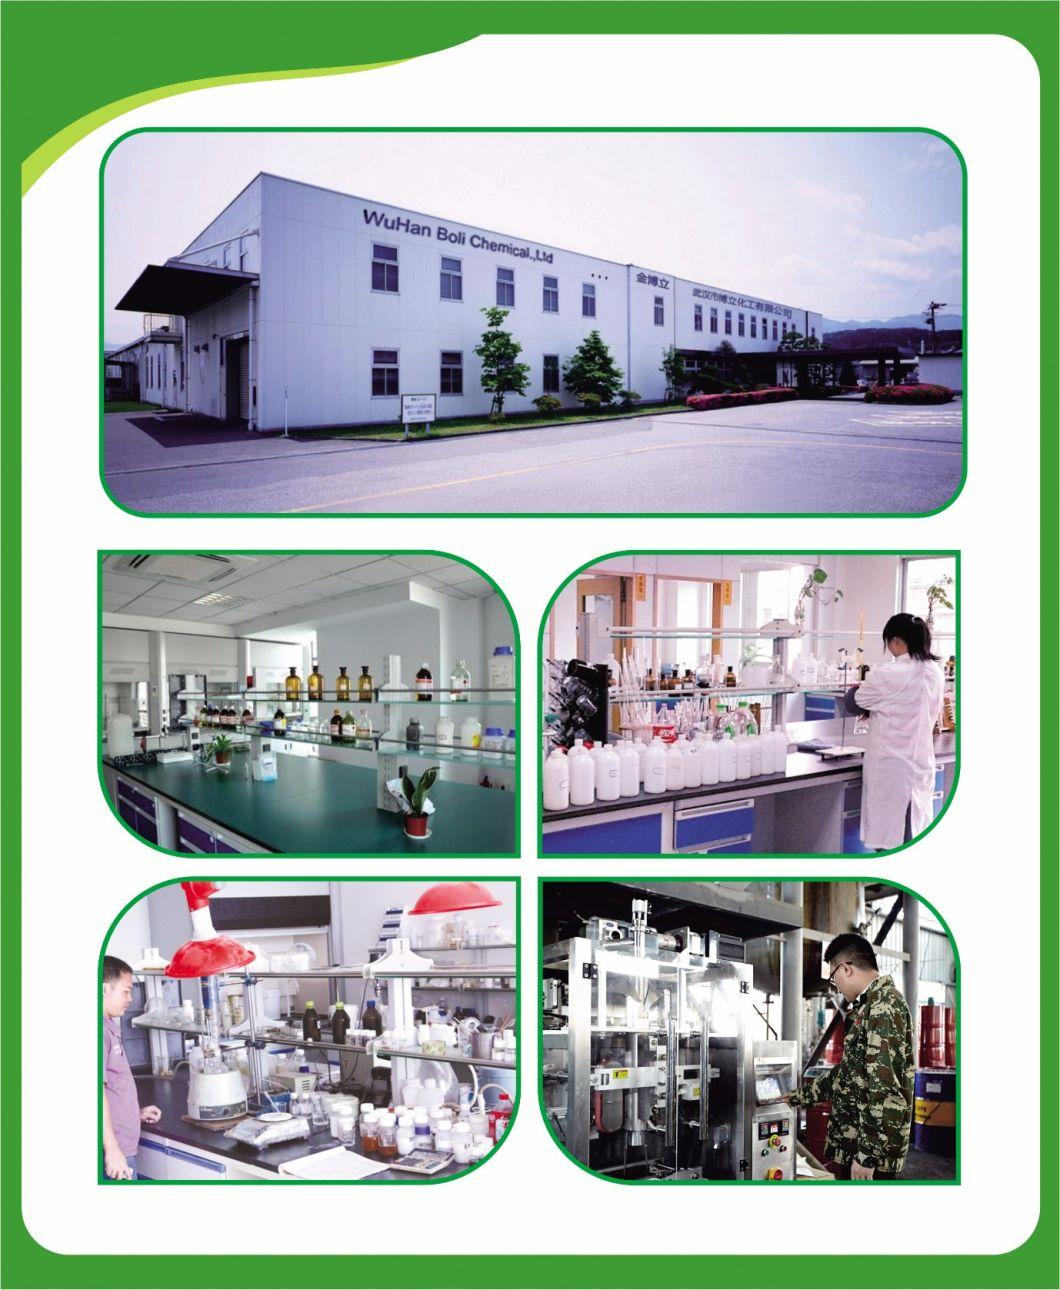 GBL Factory Construction and Other Usege Sbs Material Liquid Solvent Spray Glue Adhesive